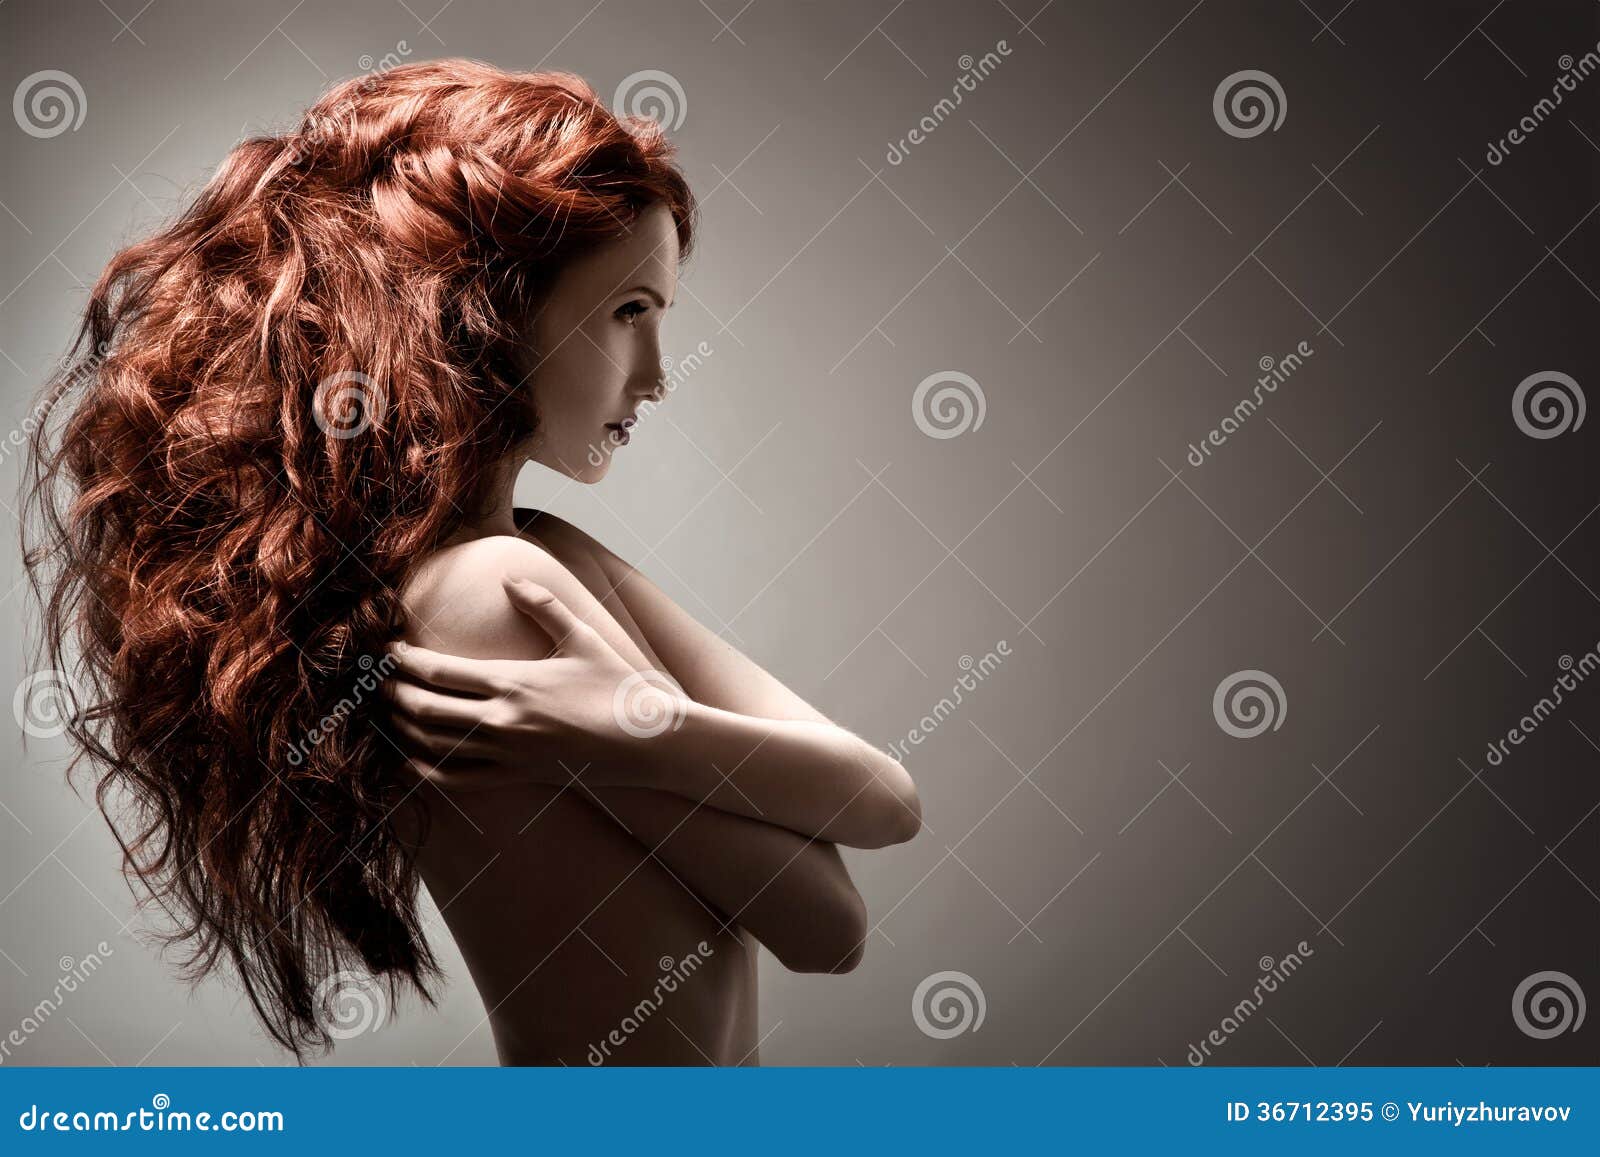 beautiful woman with curly hairstyle on gray background